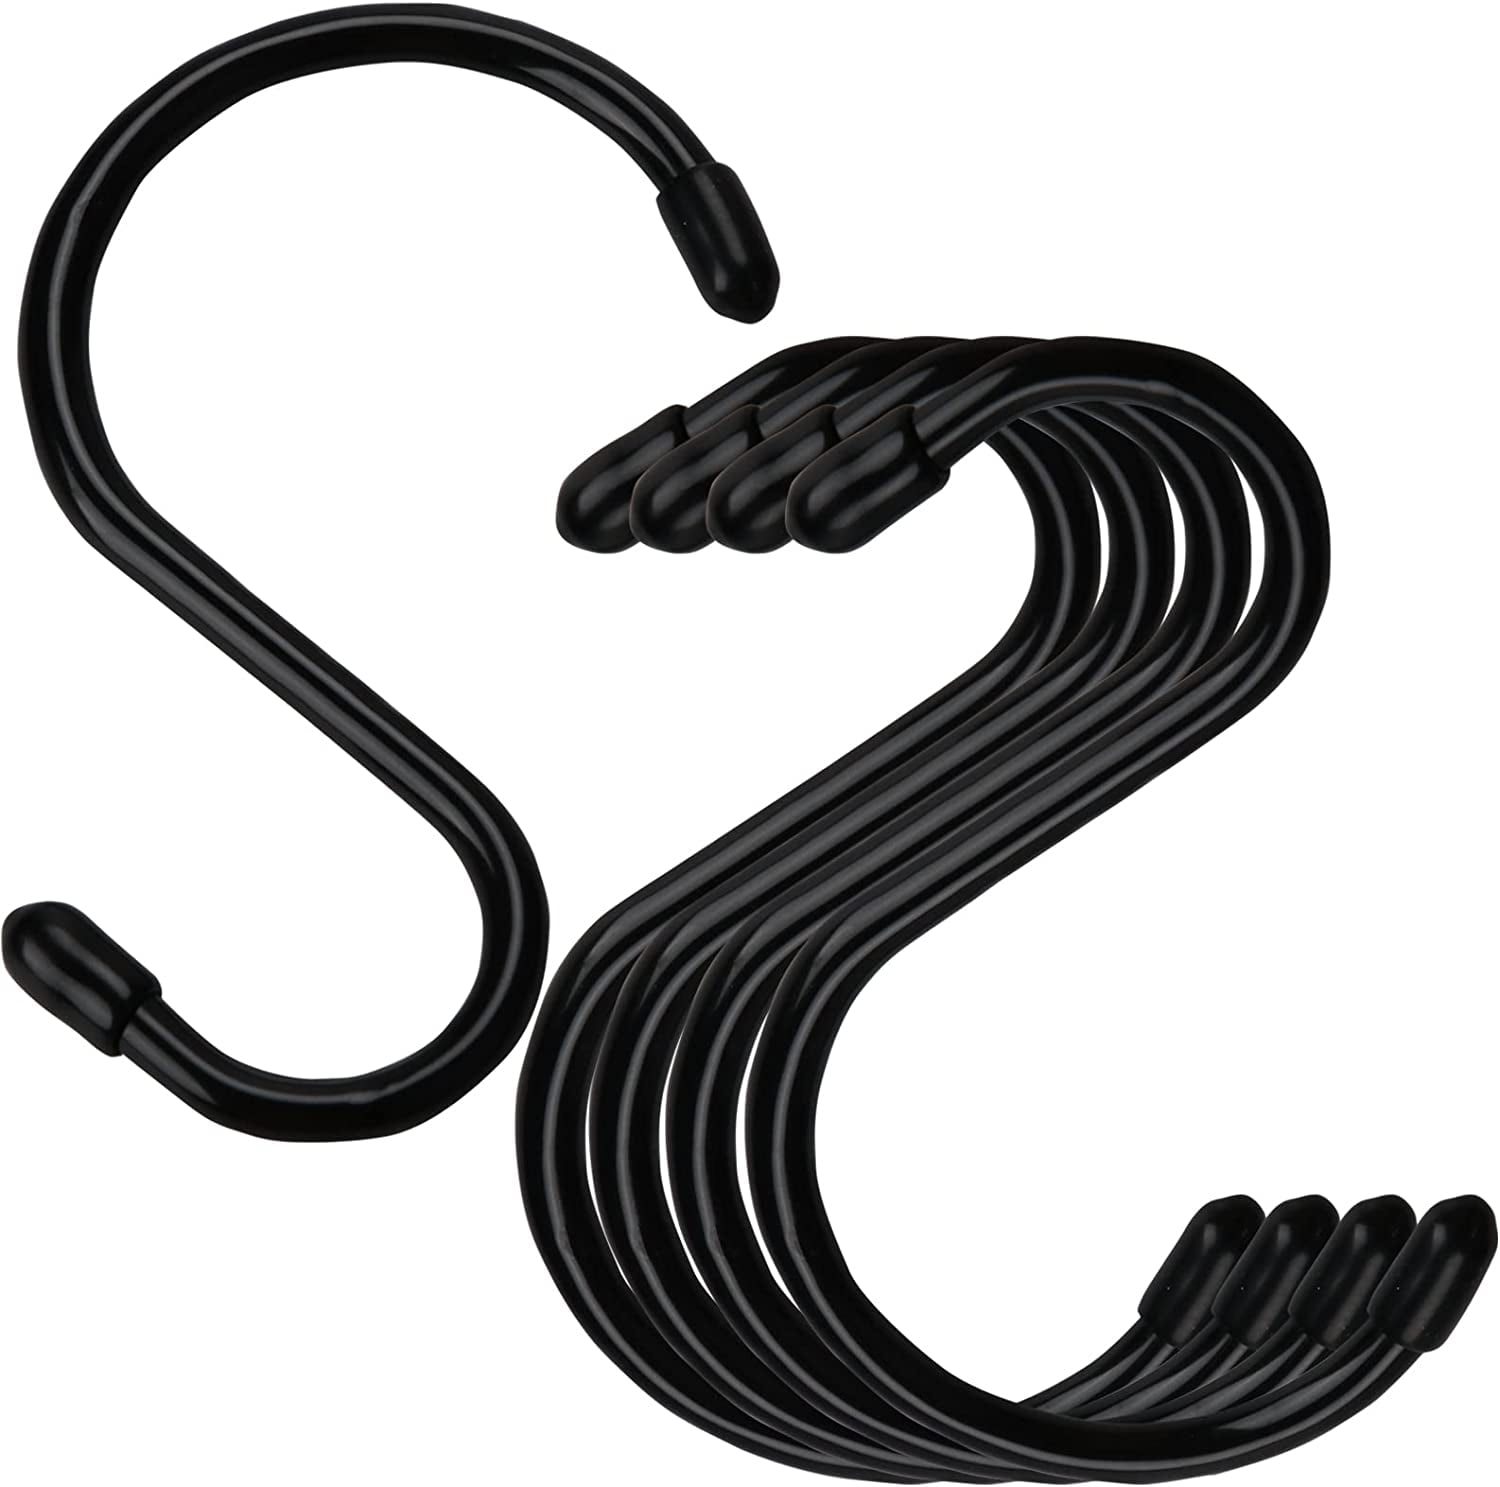 24 Pack 4 inch Large Vinyl Coated S Hooks with Rubber Stopper Non Slip  Heavy Duty S Hook, Steel Metal Black Rubber Coated Closet S Hooks for  Hanging